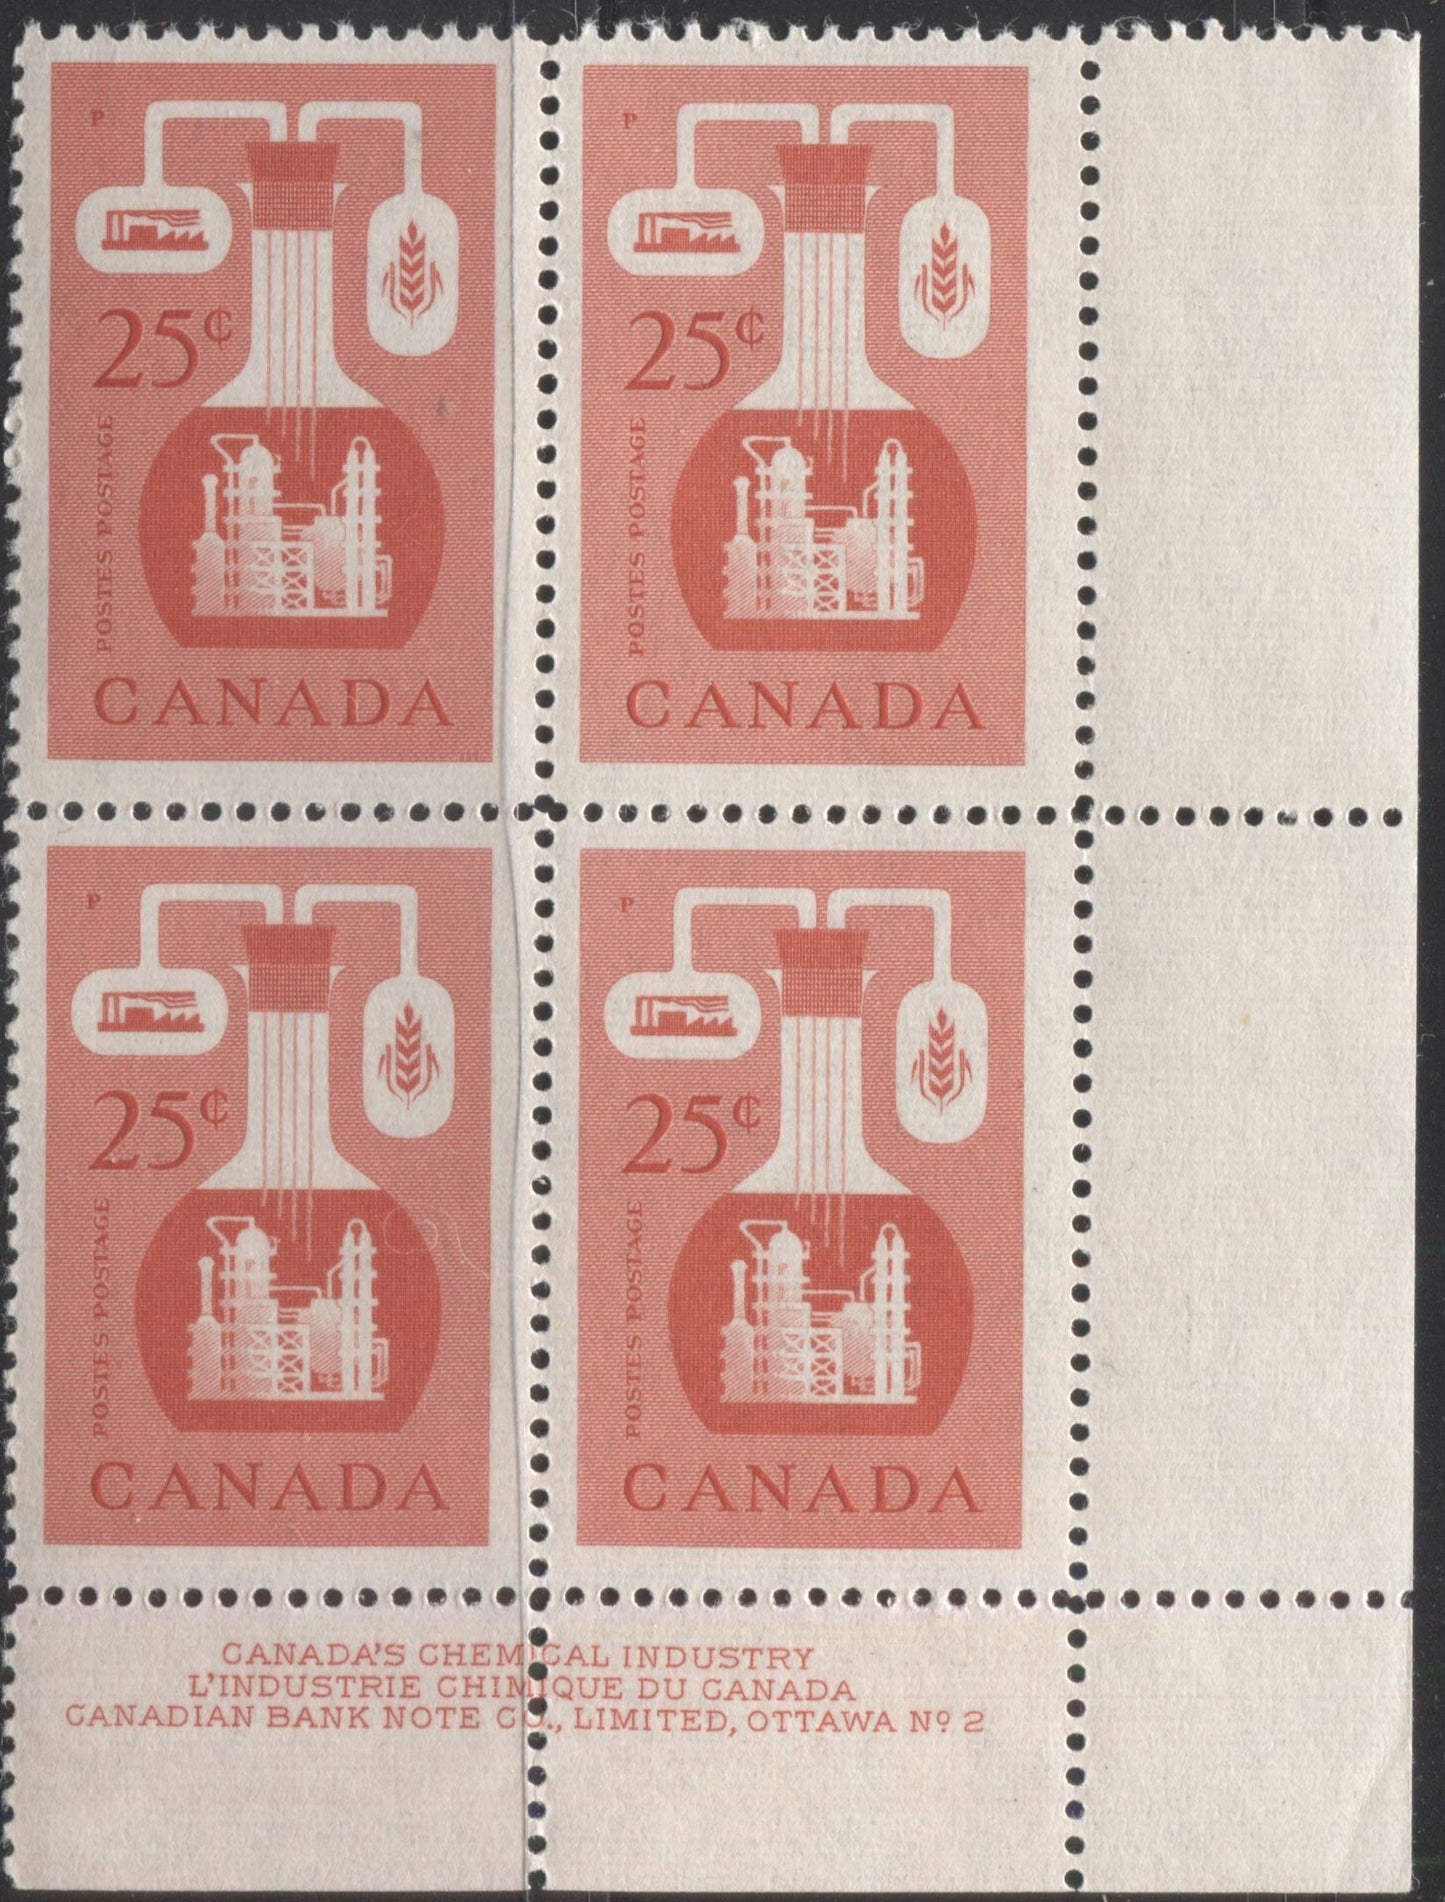 Canada #363 25c Bright Vermilion Chemical Industry, 1954-67 Wilding and Cameo Issue, a FNH Lower Right Plate 2 Block on Dull Fluorescent Greyish White Ribbed Paper, Perf. 11.9 x 11.95